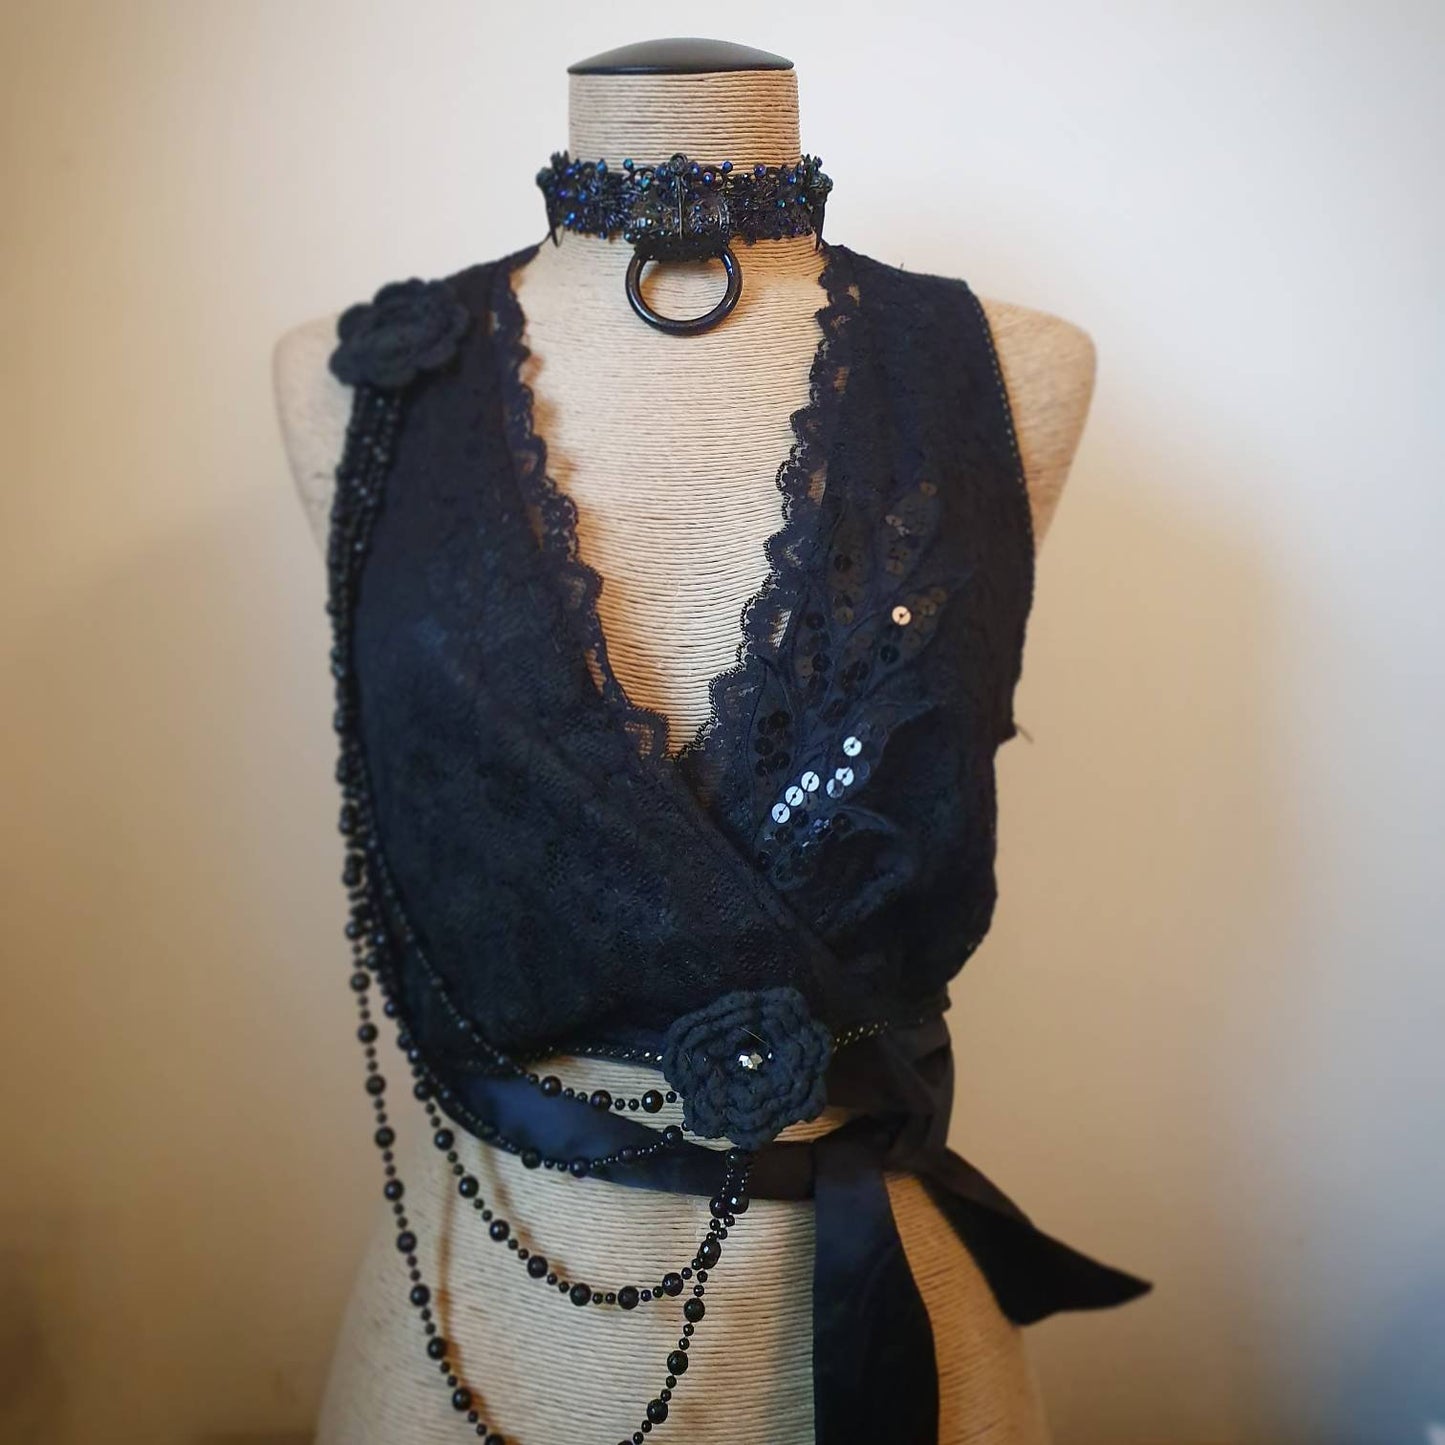 Raven's Graveyard Metal Choker in black w irredecent blue and black rhinestones, sample couture show piece